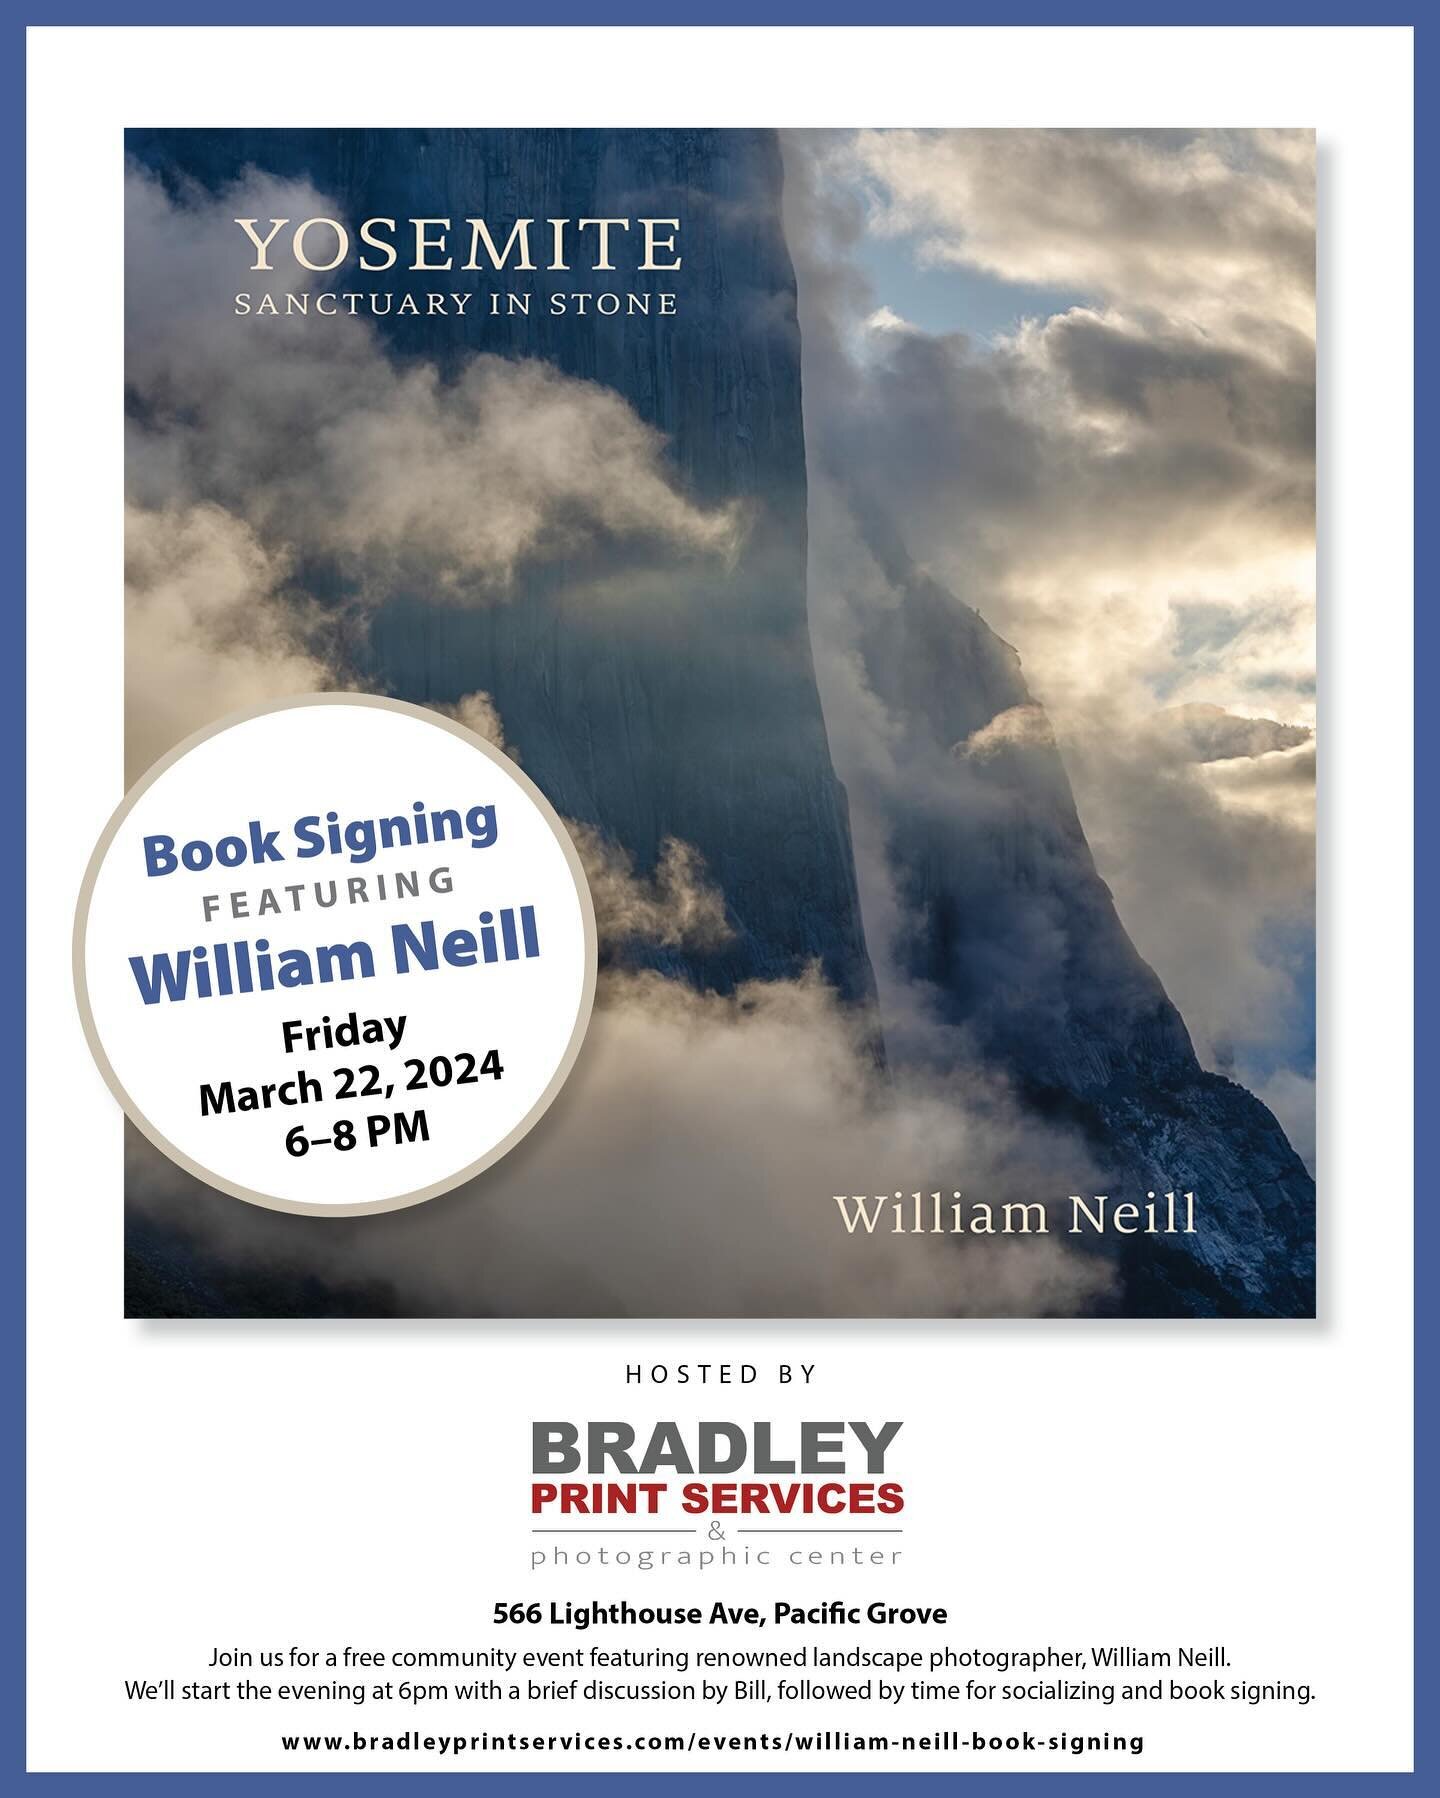 📸 Join us for an evening with legendary landscape photographer @williamneill on Friday, March 22! We&rsquo;re excited to host a discussion and book signing for his latest work &lsquo;Yosemite: Sanctuary in Stone.&rsquo; Delve into 46 years of his re